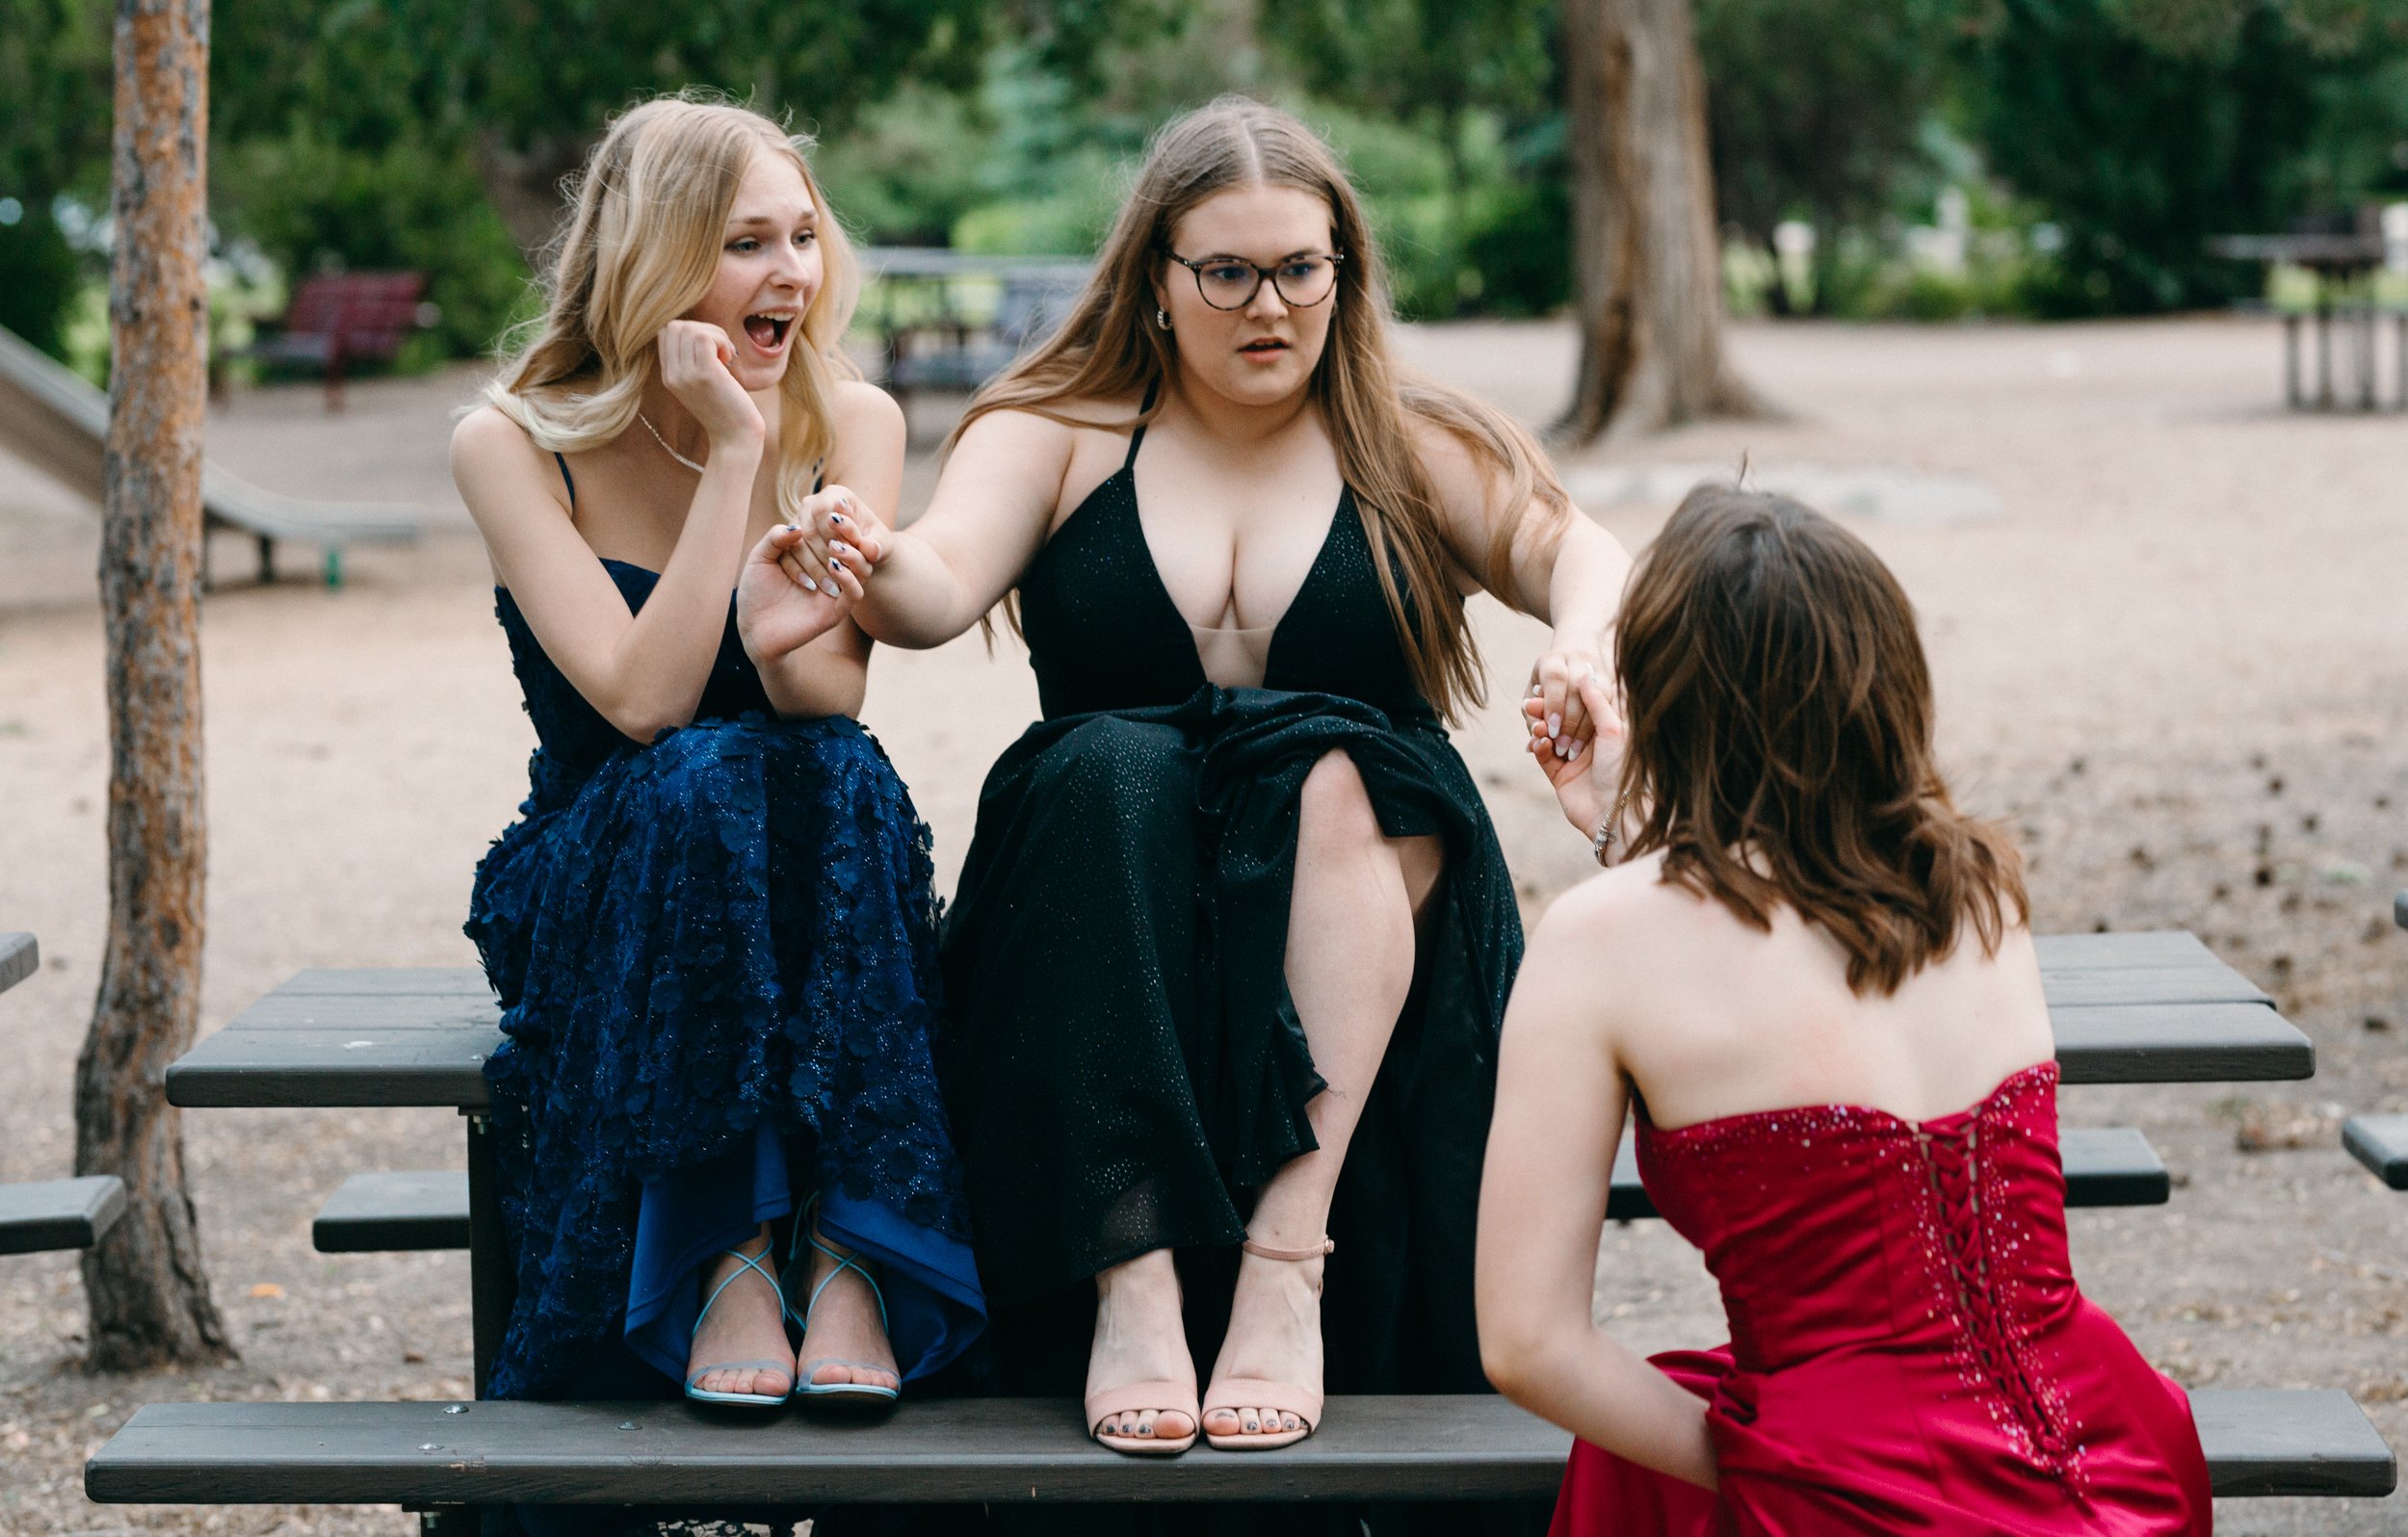  two girls in grad dresses sit on picnic table while the third is down on one knee pretending to propose to the middle girl. her shocked face a funny sight 